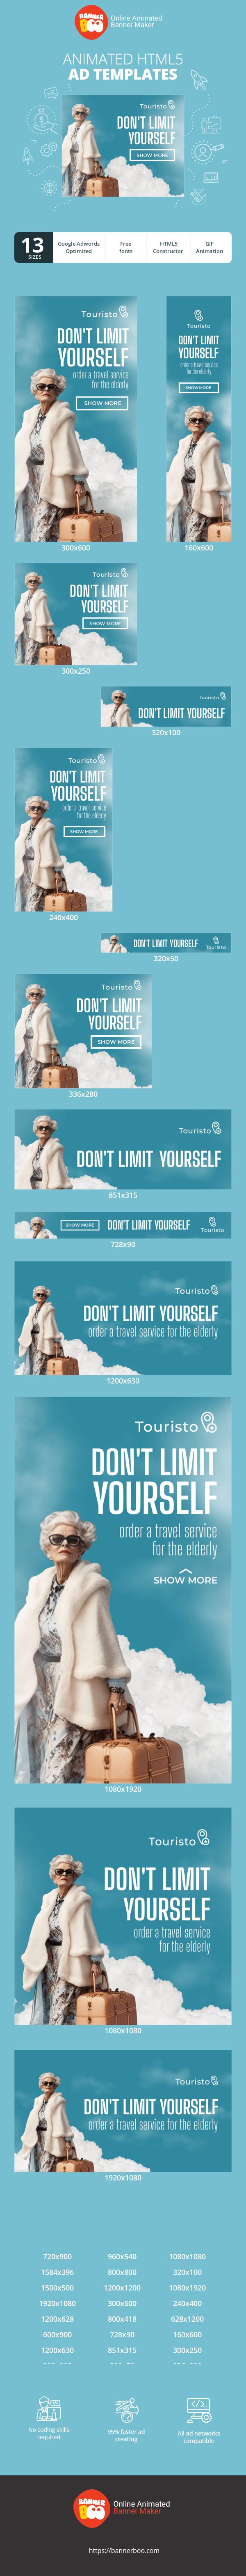 Szablon reklamy banerowej — Don't Limit Yourself — Order A Travel Service For The Elderly